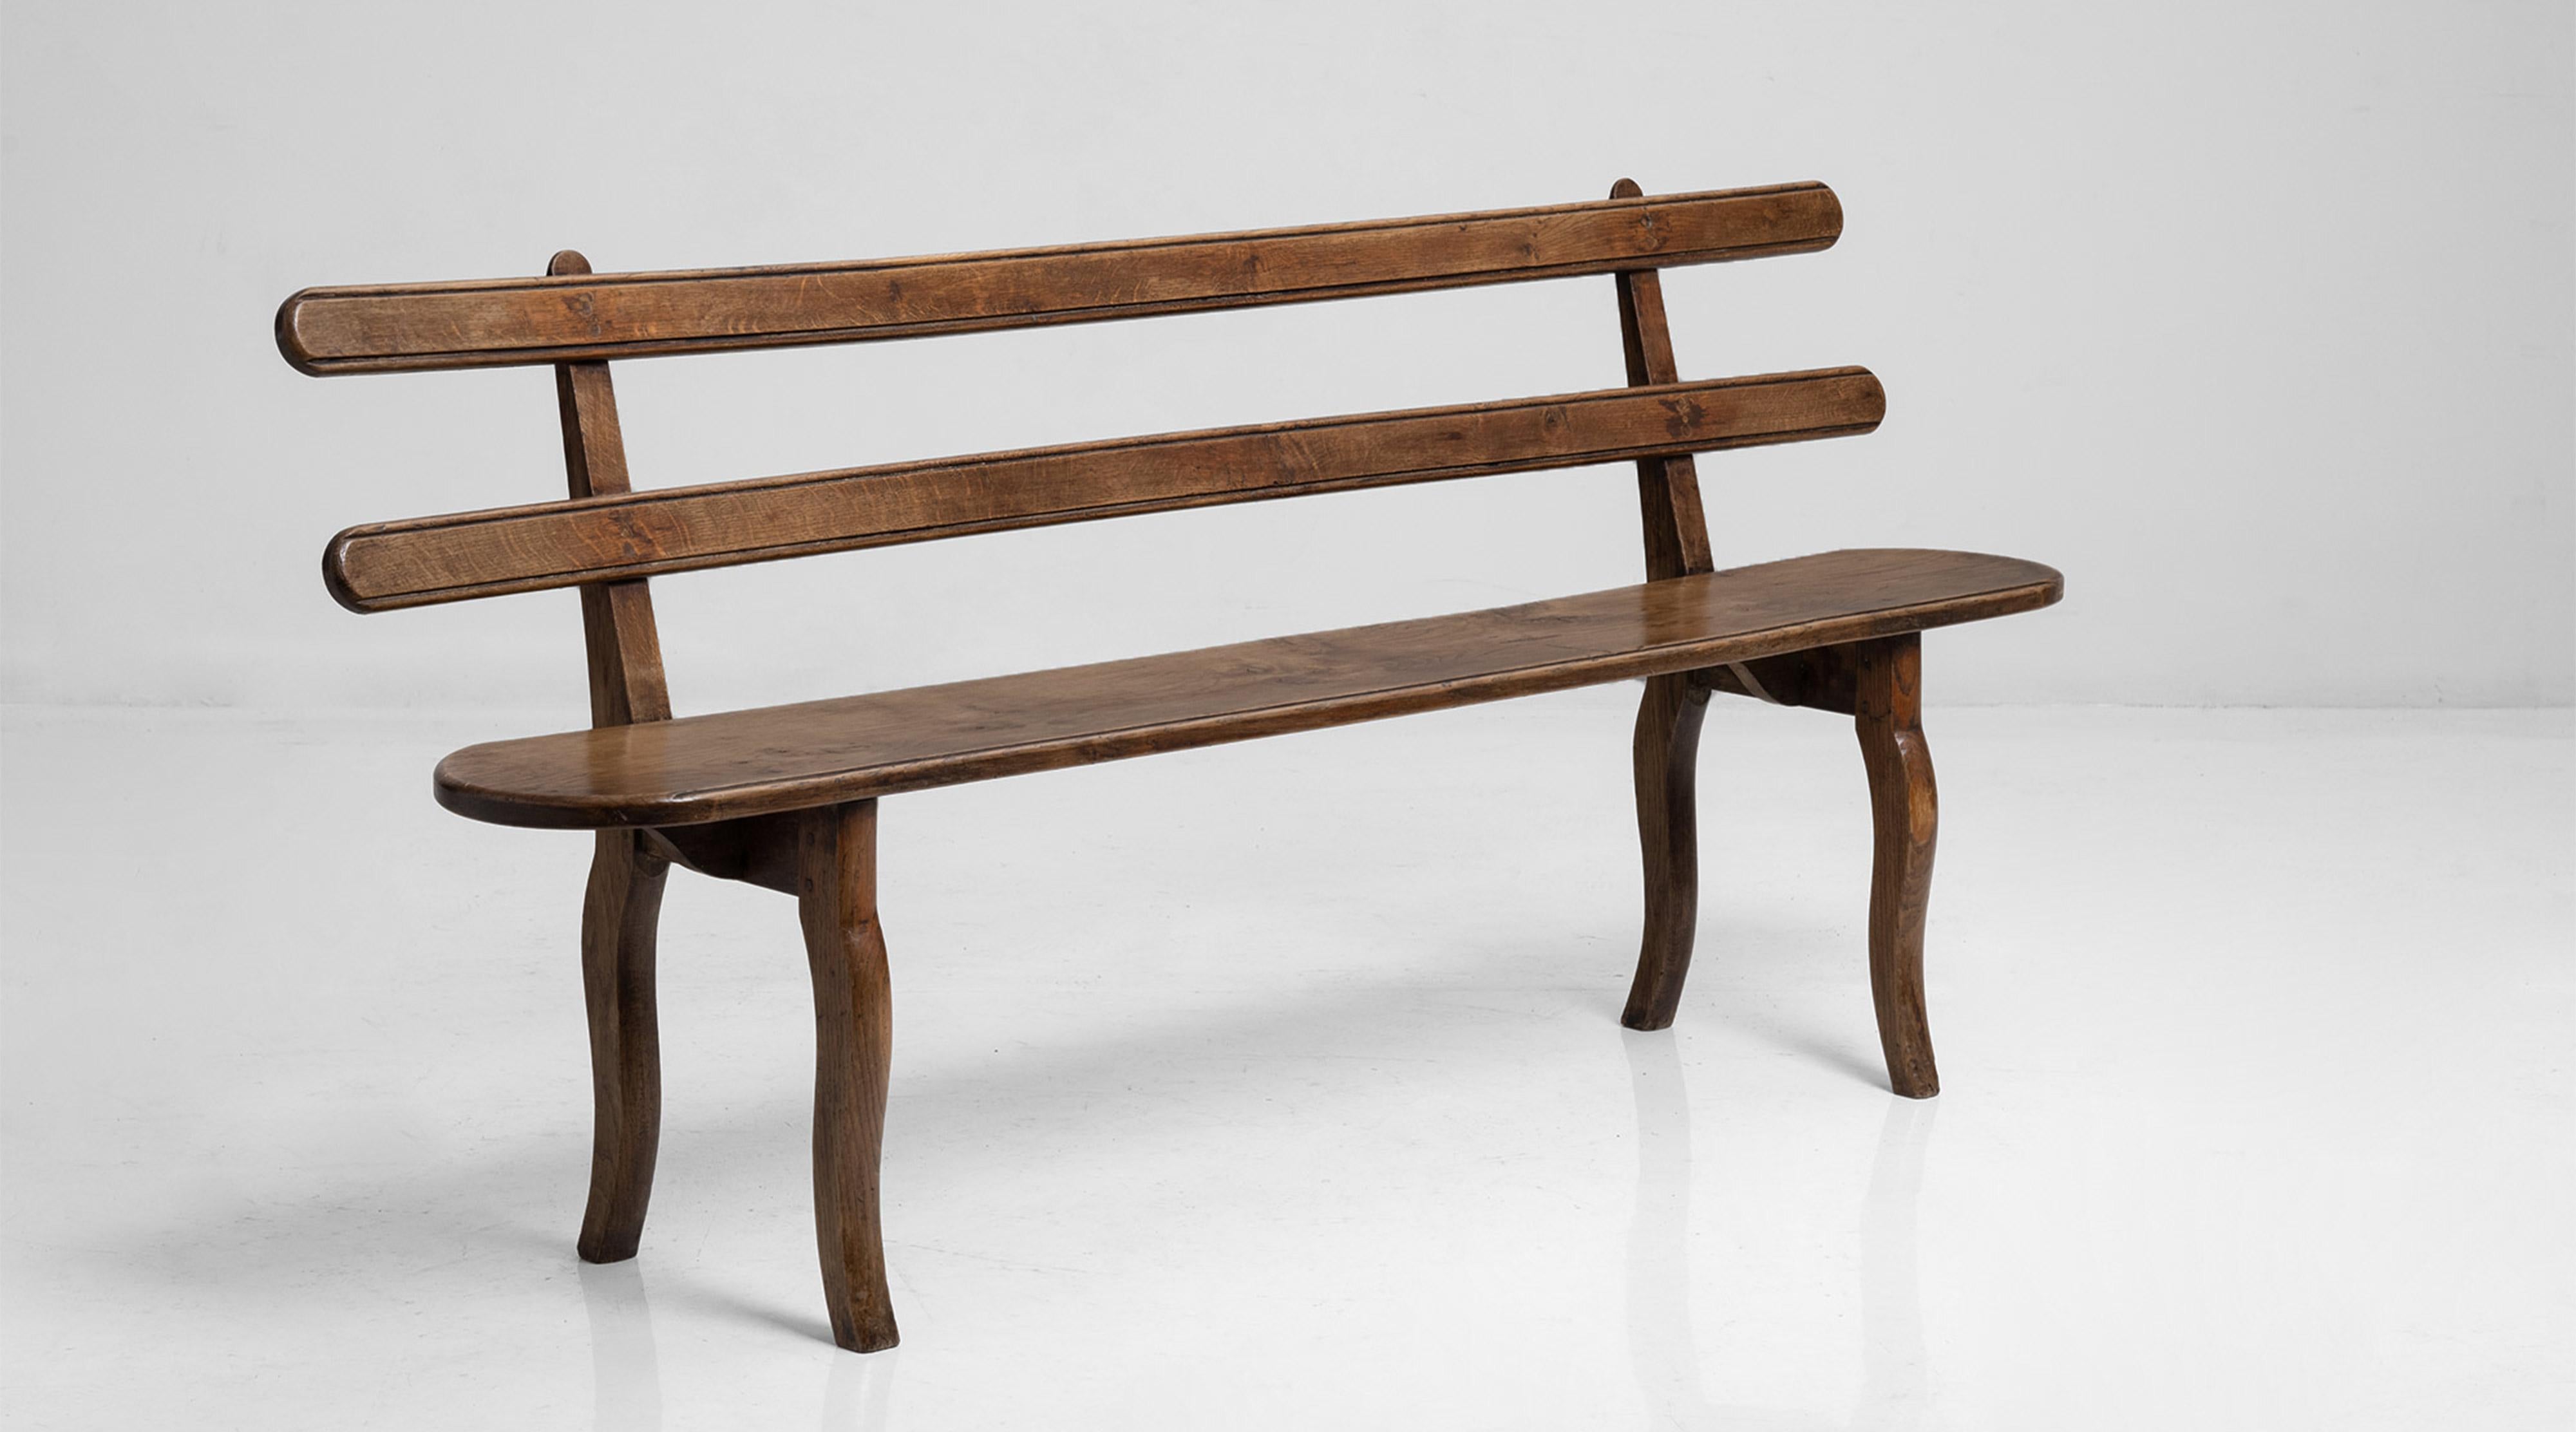 Beautifully made hand crafted bench with fine curves and horizontal back rest bars.